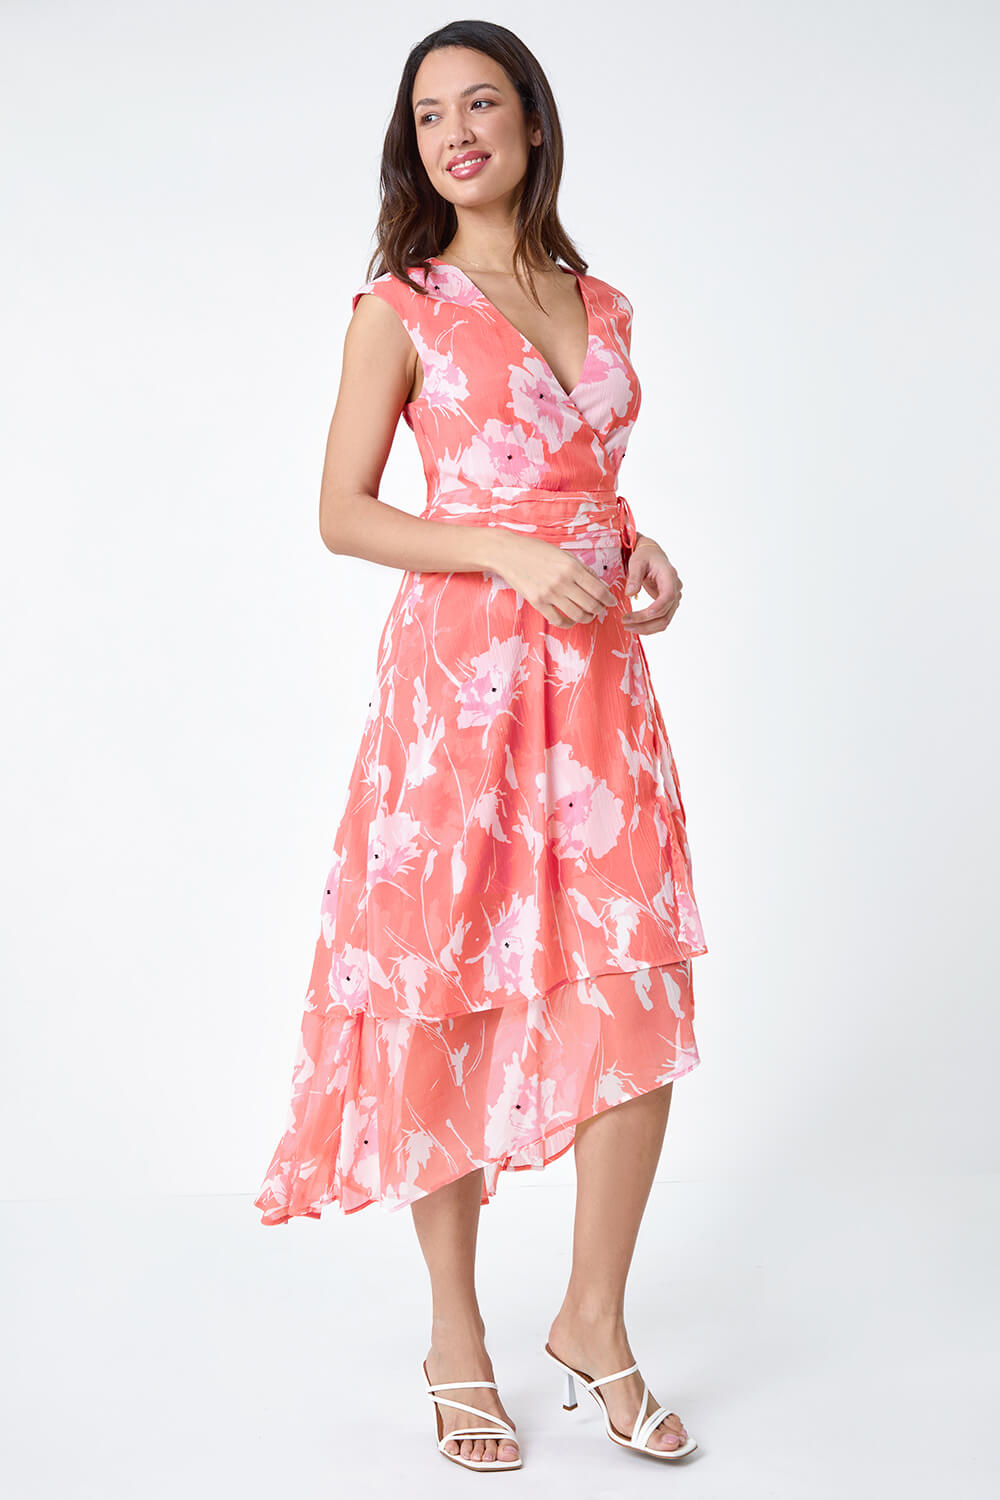 CORAL Embellished Floral Print Tiered Midi Dress, Image 2 of 5